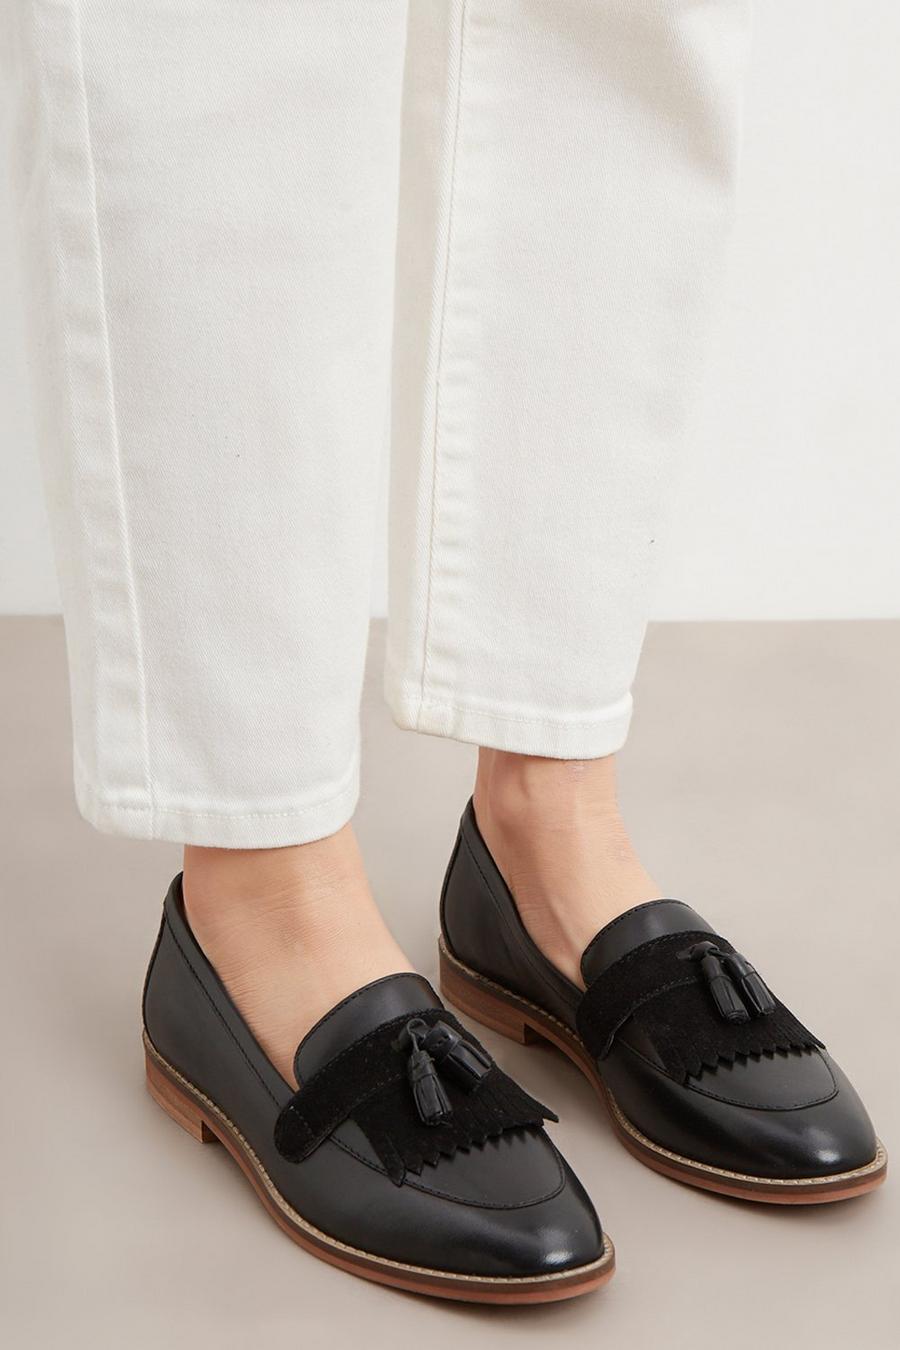 Principles: Colette Leather Fringed Loafers